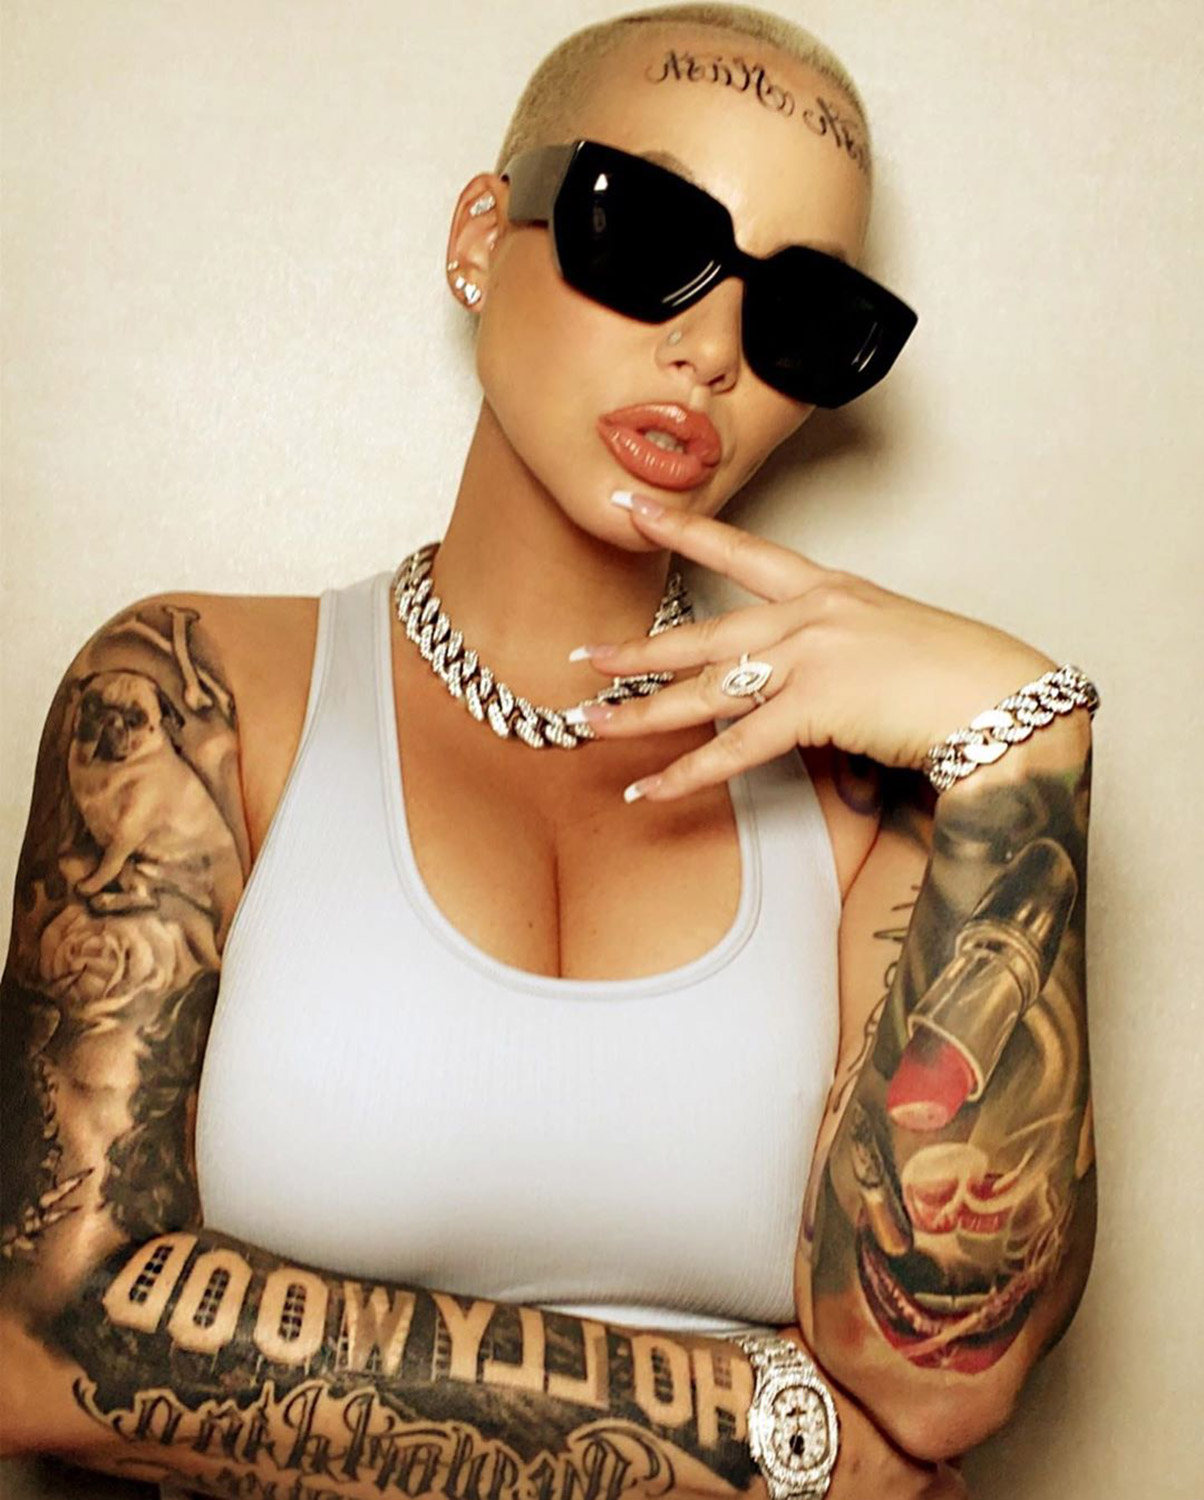 Amber Rose vows to never date again